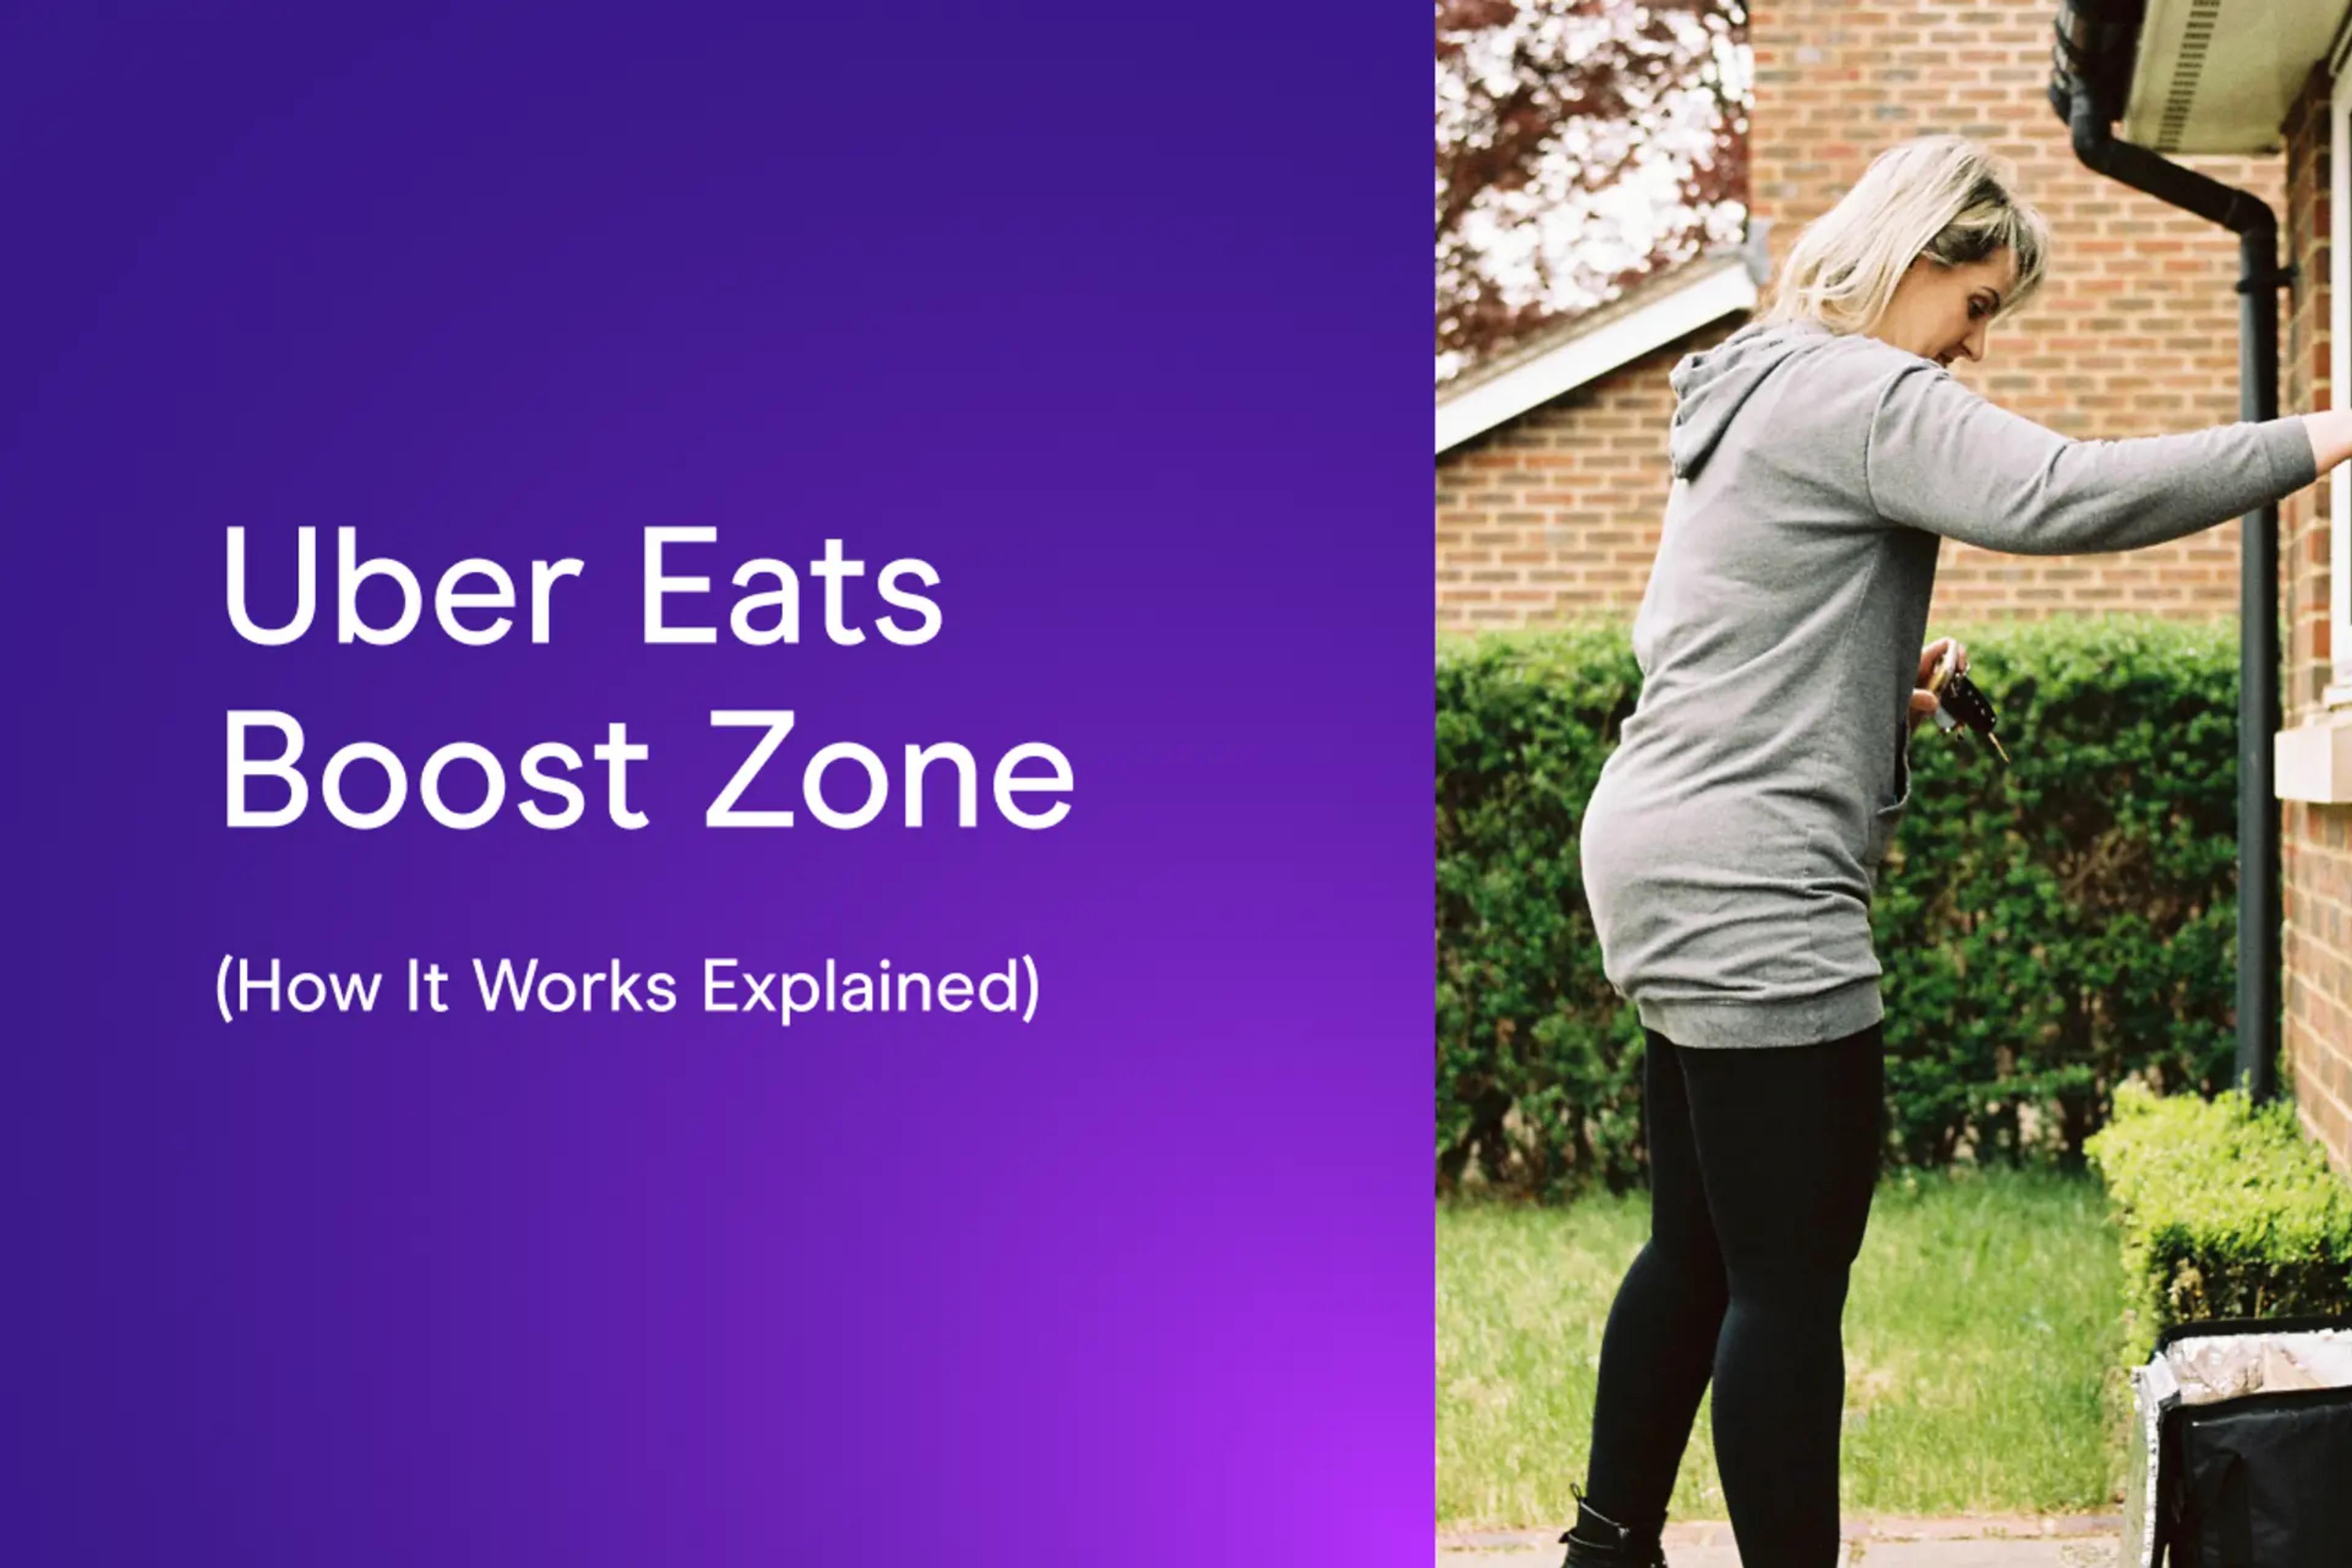 Uber Eats Boost Zone - (How It Works Explained)